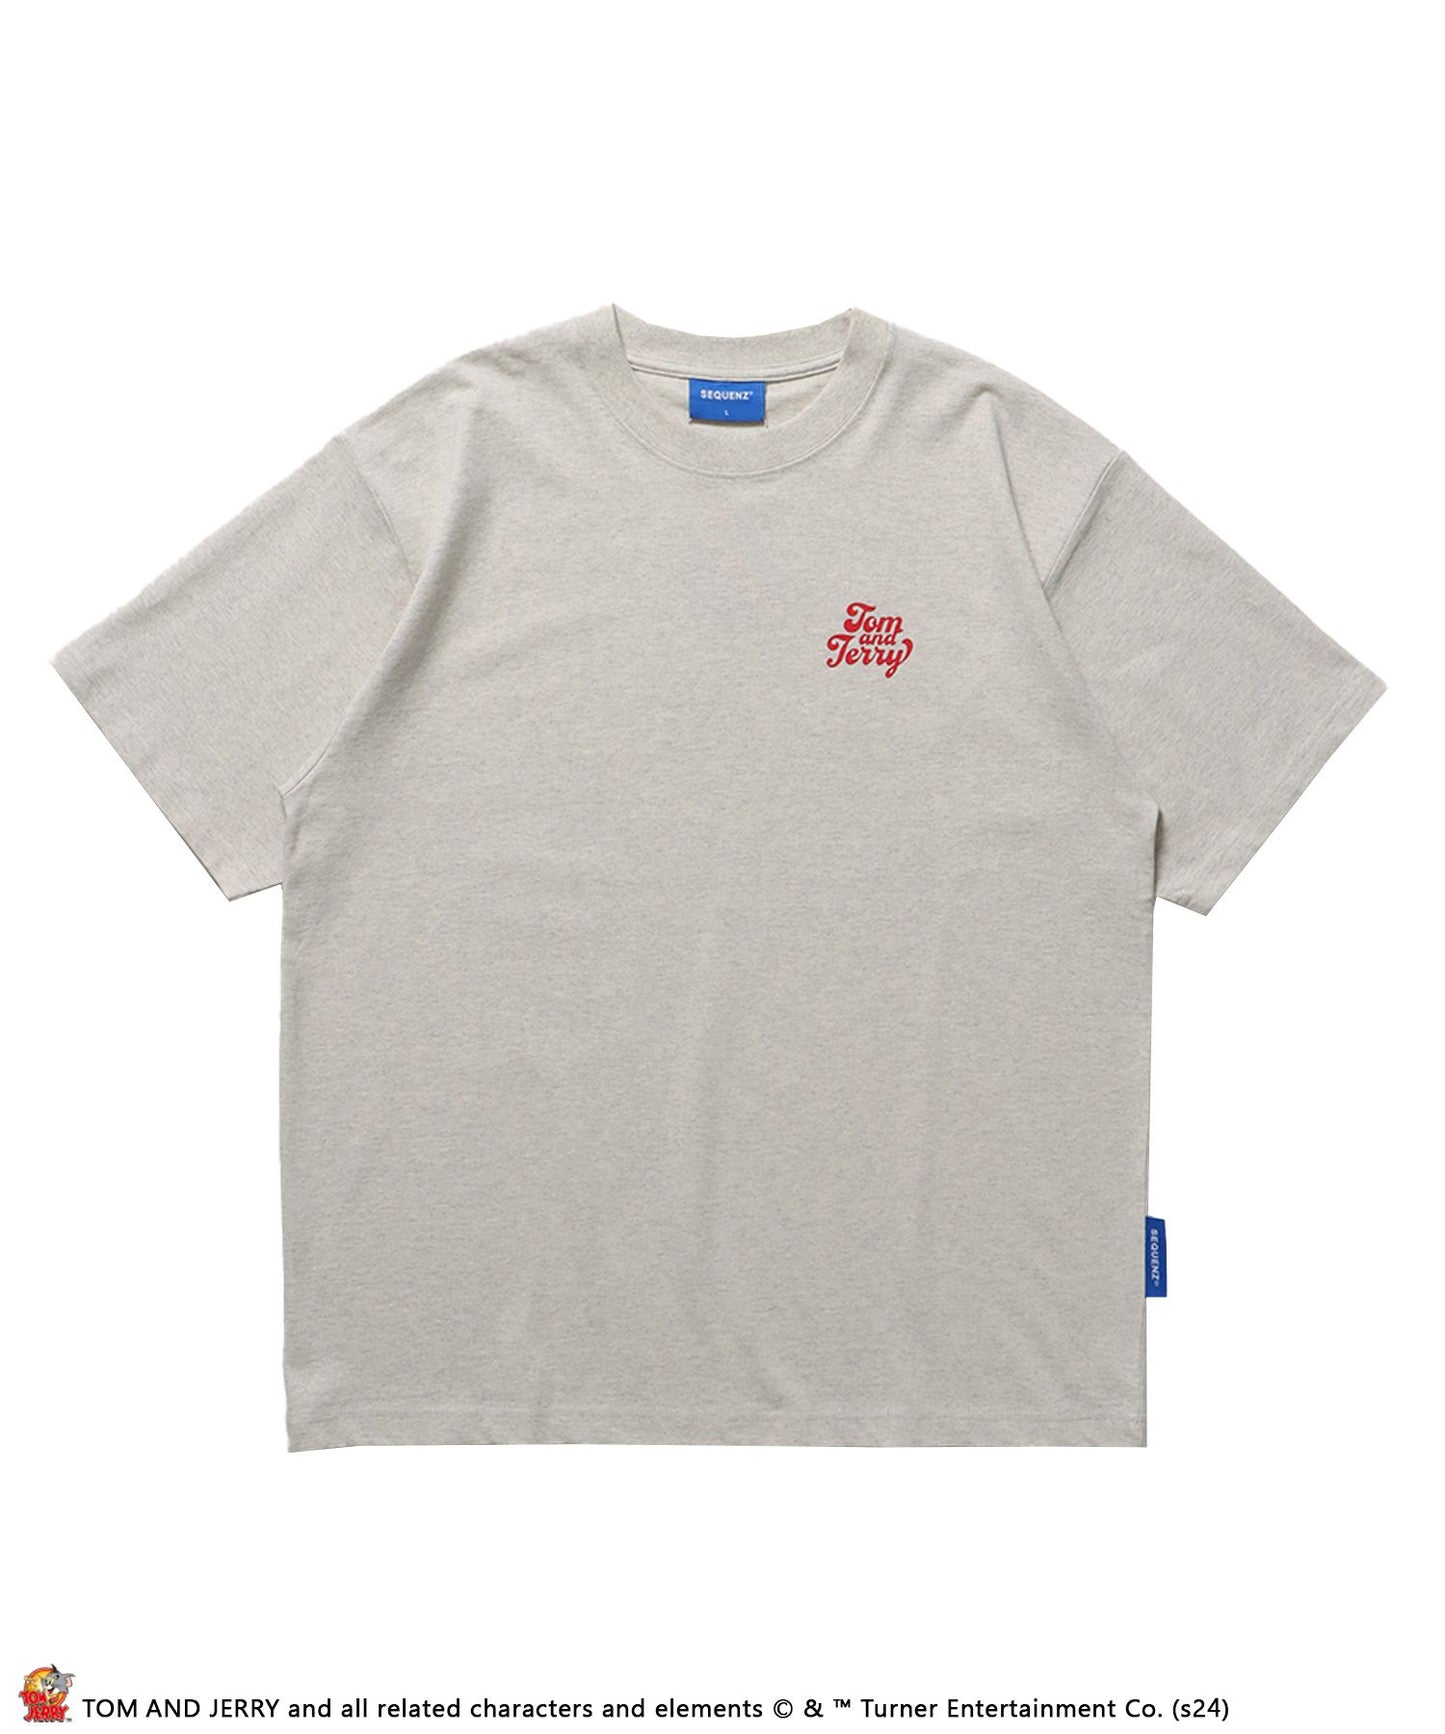 【SEQUENZ（シークエンズ）】TJ SANDWICH SHOP S/S TEE / TOM and JERRY トムジェリ アメリカンダイナー Tシャツ レトロ クリームソーダ プリント 半袖 アッシュグレー